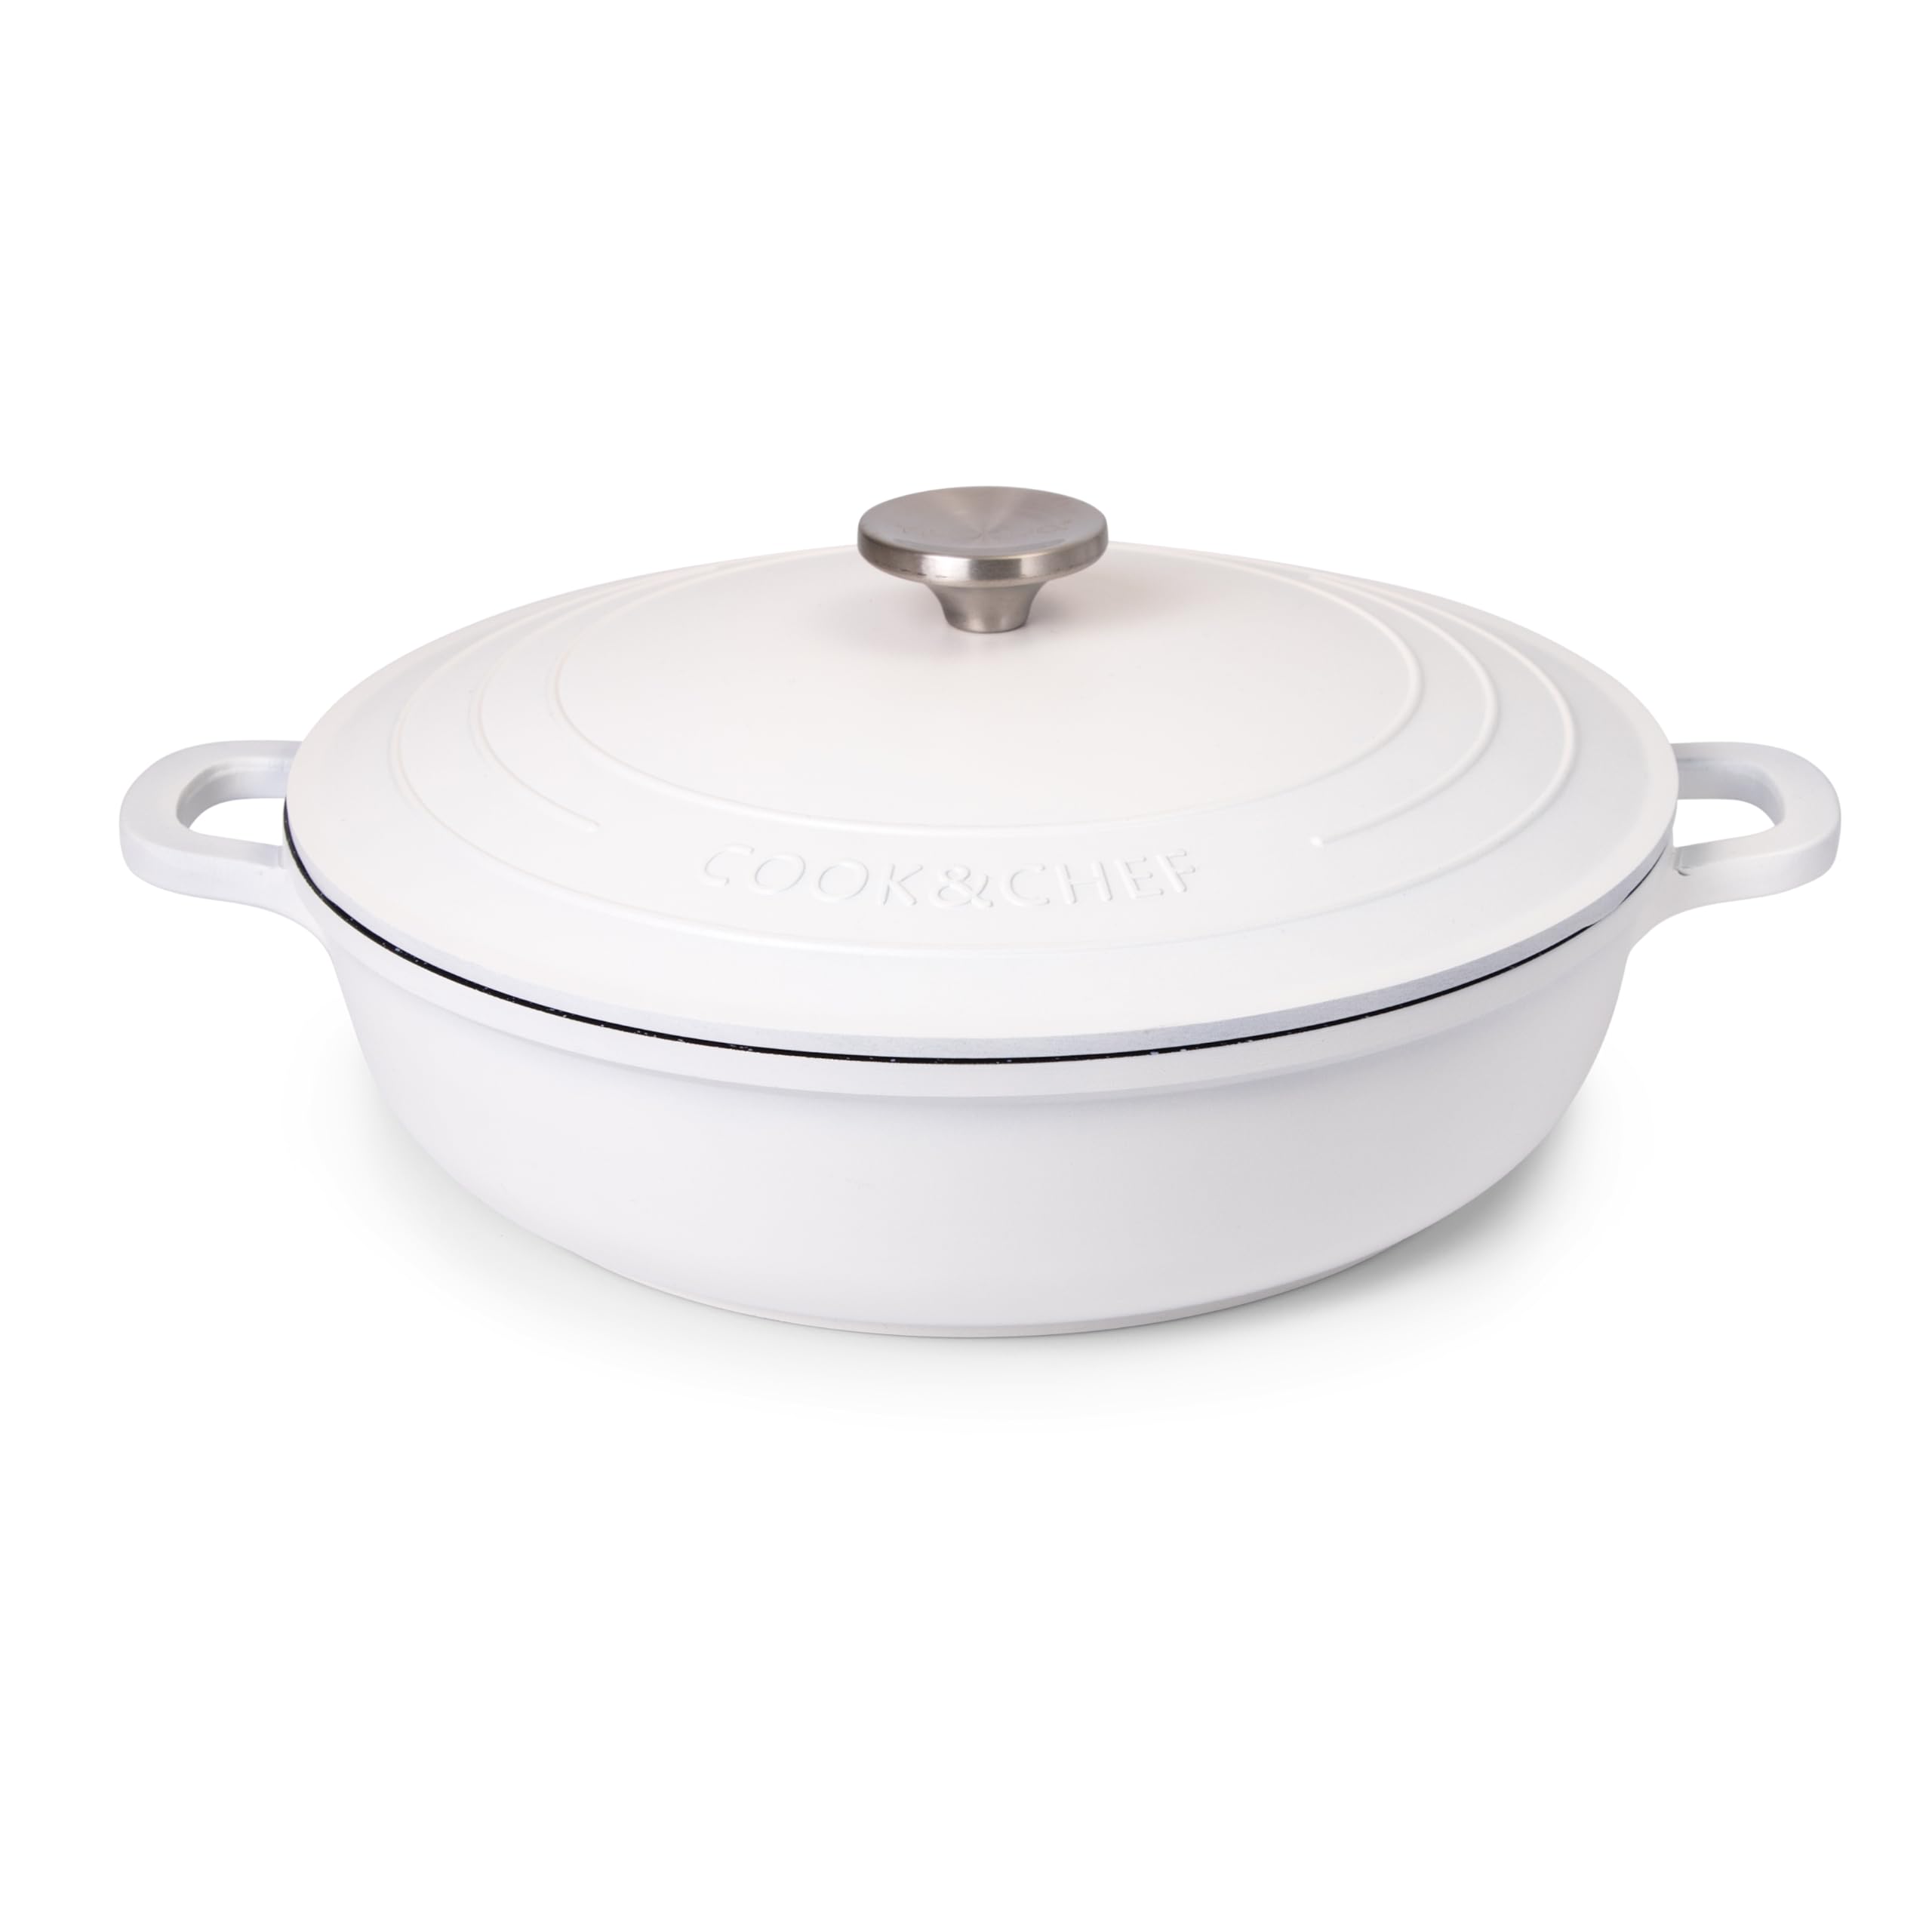 Nuovva casserole Dishes with Lid Oven Proof - Non Stick Shallow Dutch Oven - Induction cooking Pot - Oven Safe Aluminium Stockpot - 39L